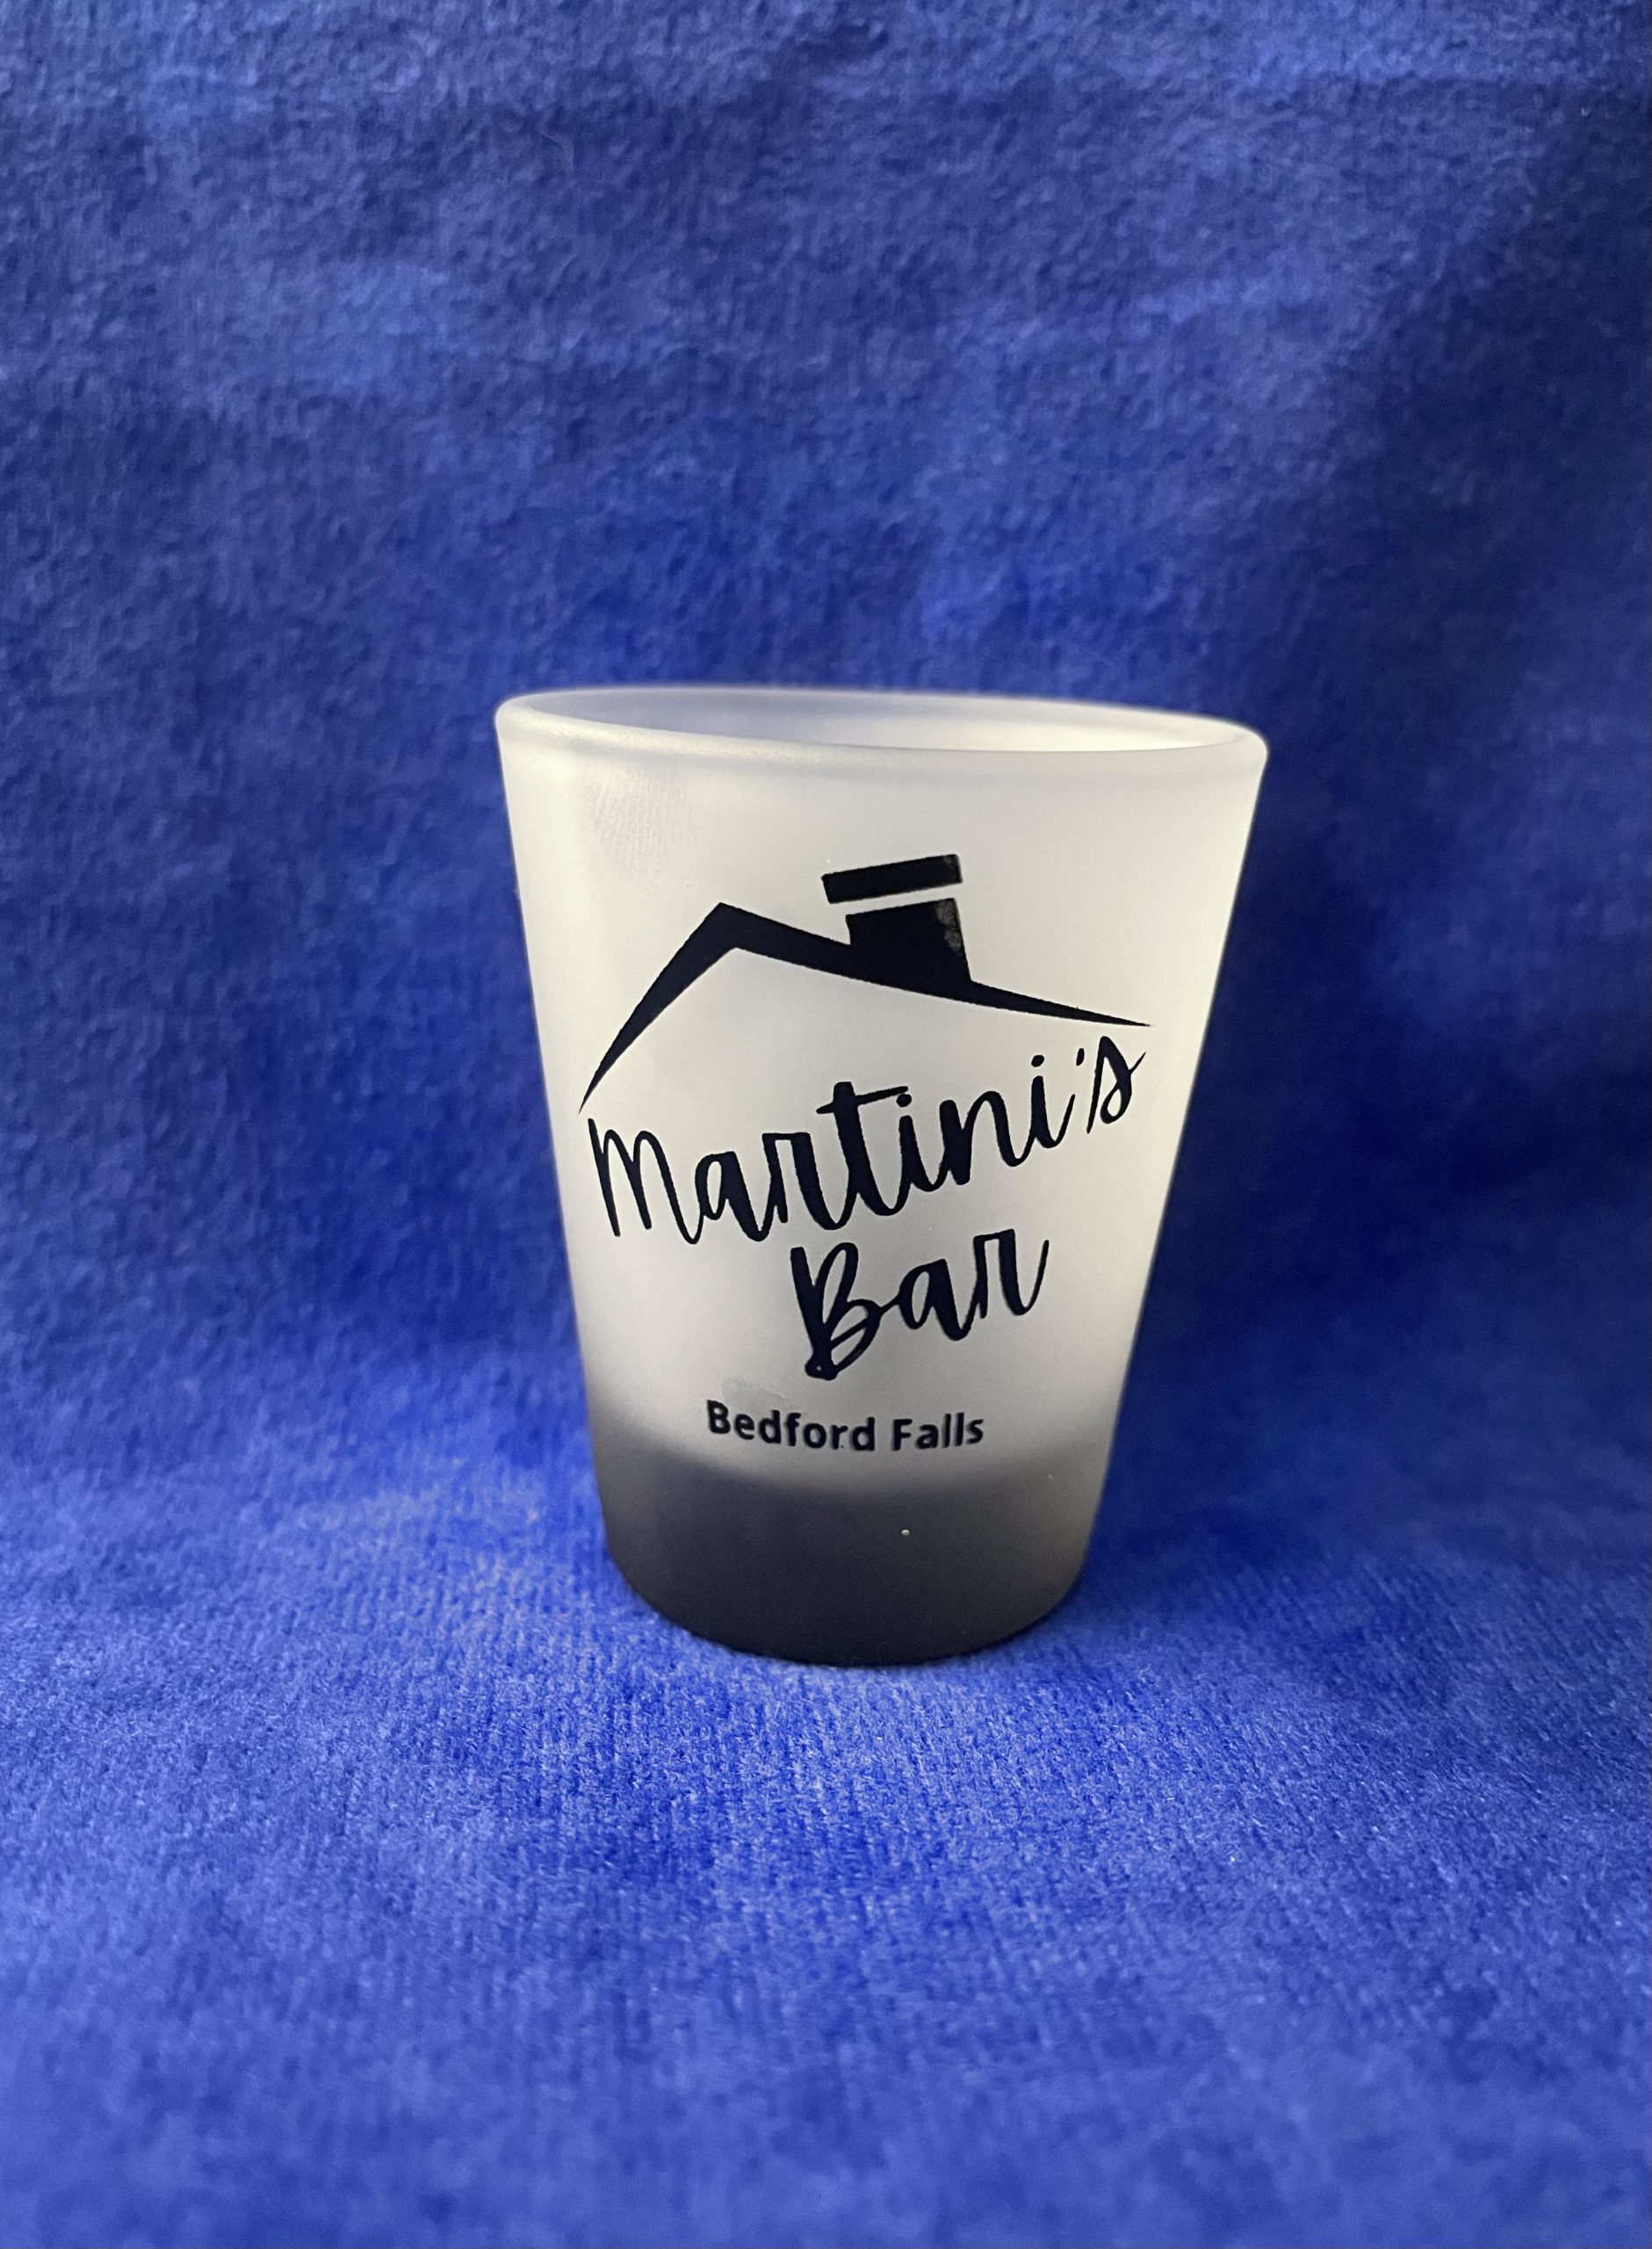 https://jimmy.org/wp-content/uploads/2021/06/Martinis-Shot-glass-scaled.jpg